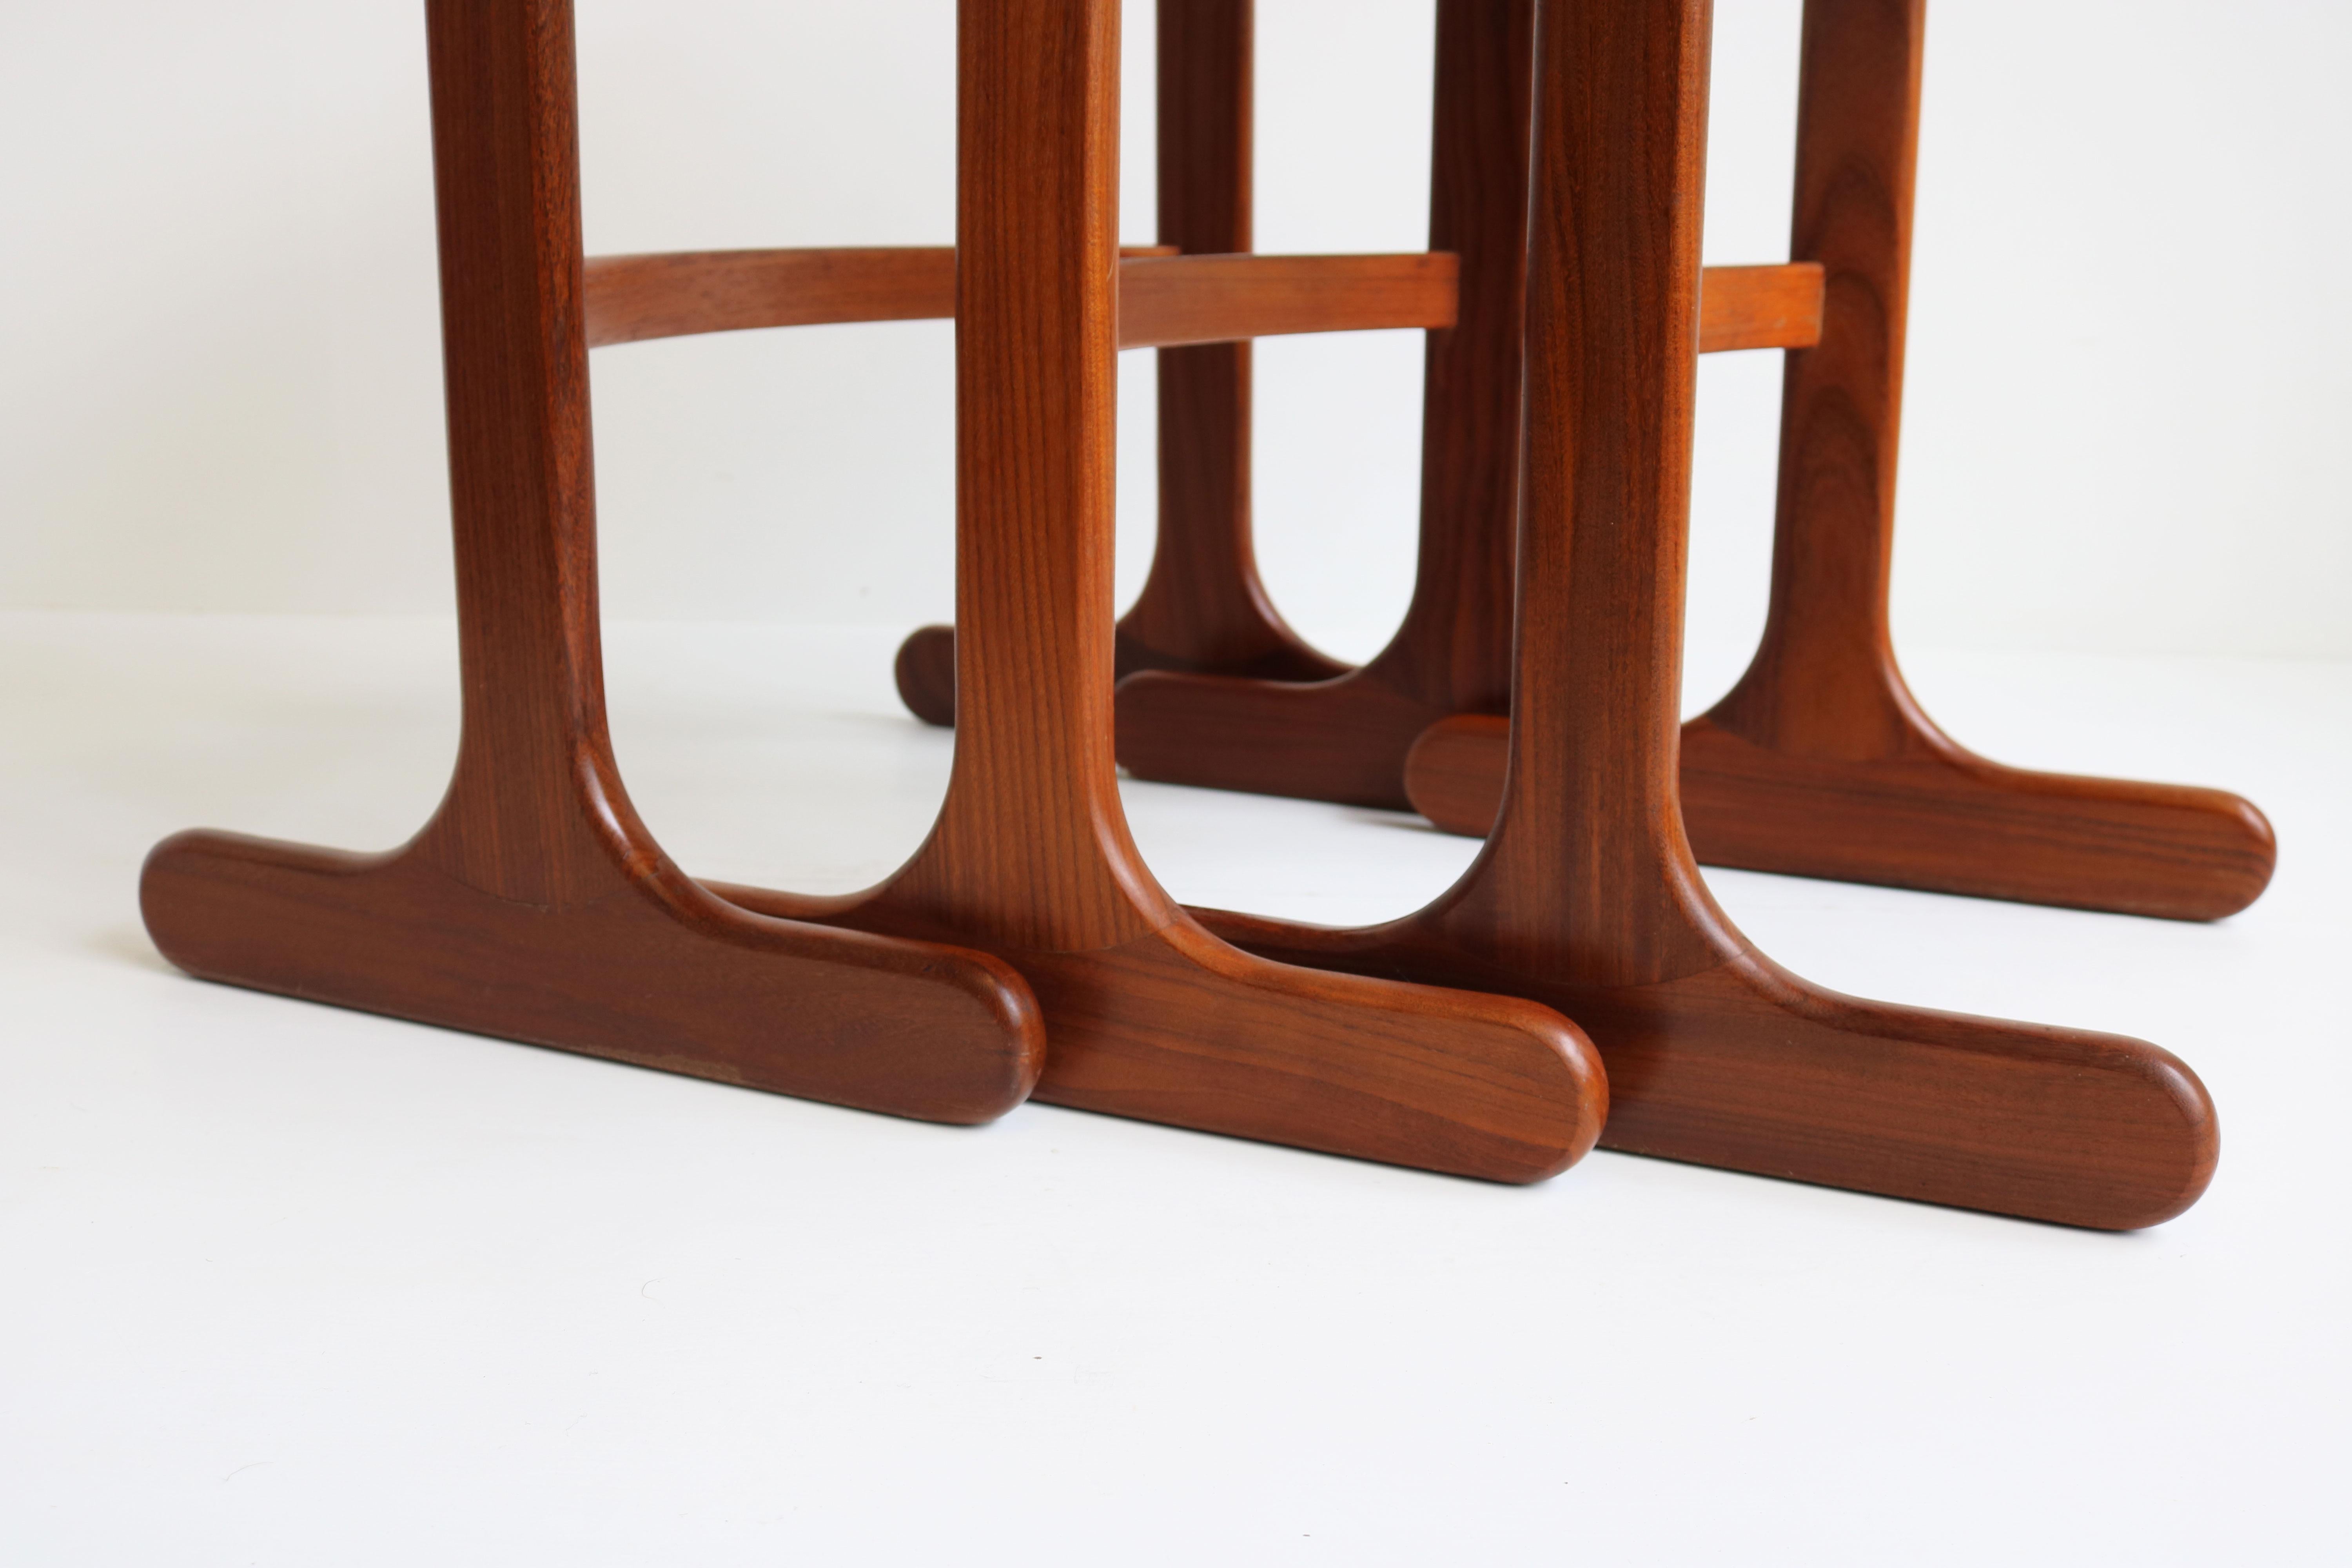 English Mid-Century Modern Design Nesting Tables by G-Plan 1960 Teak Stacking Tables For Sale